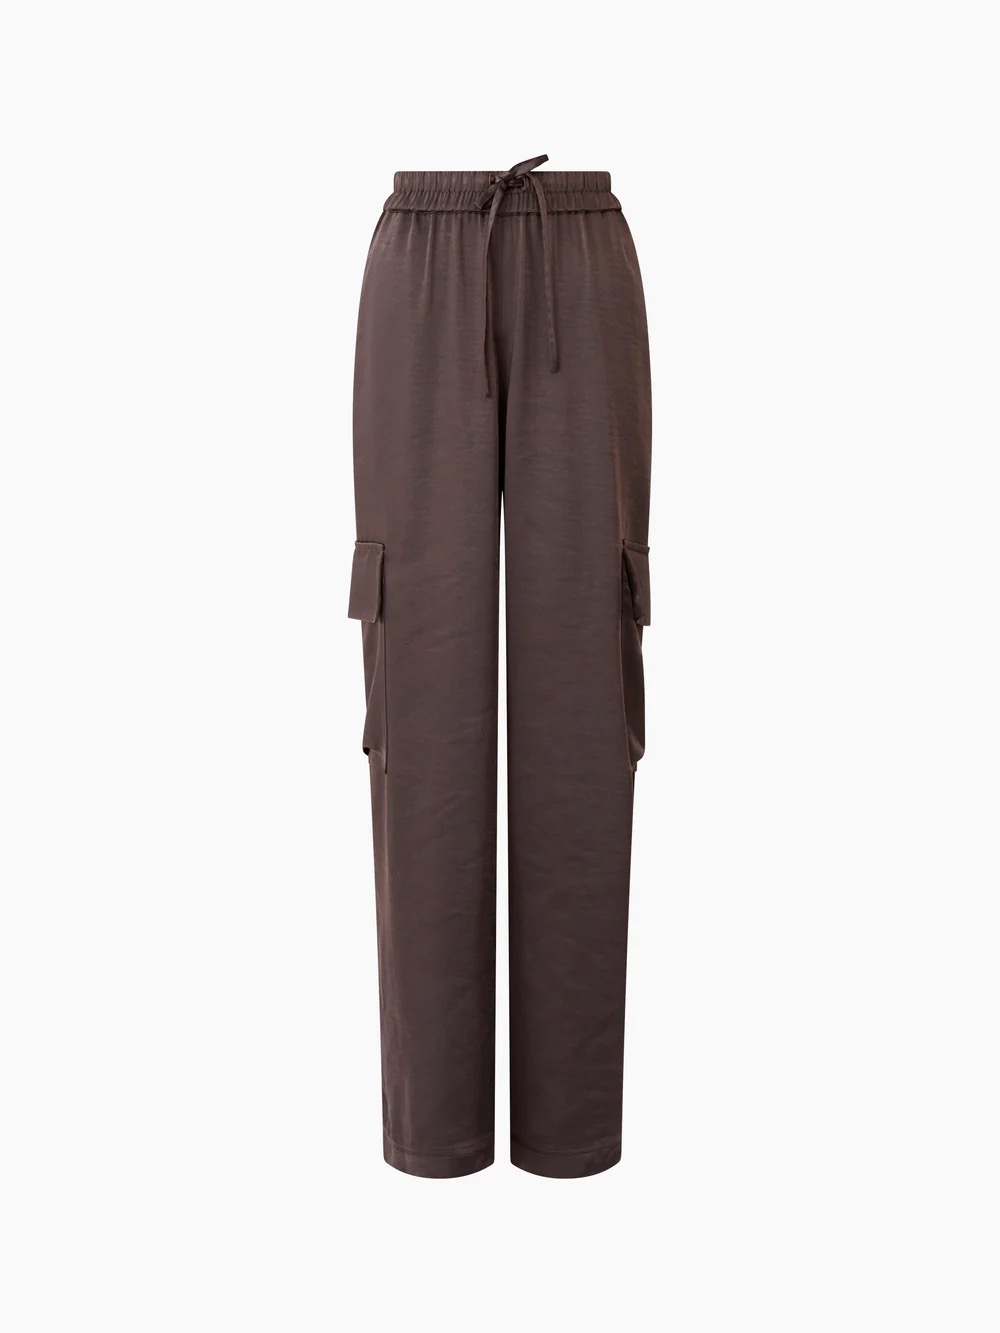 French Connection Chloetta Cargo Trouser | Chocolate Torte